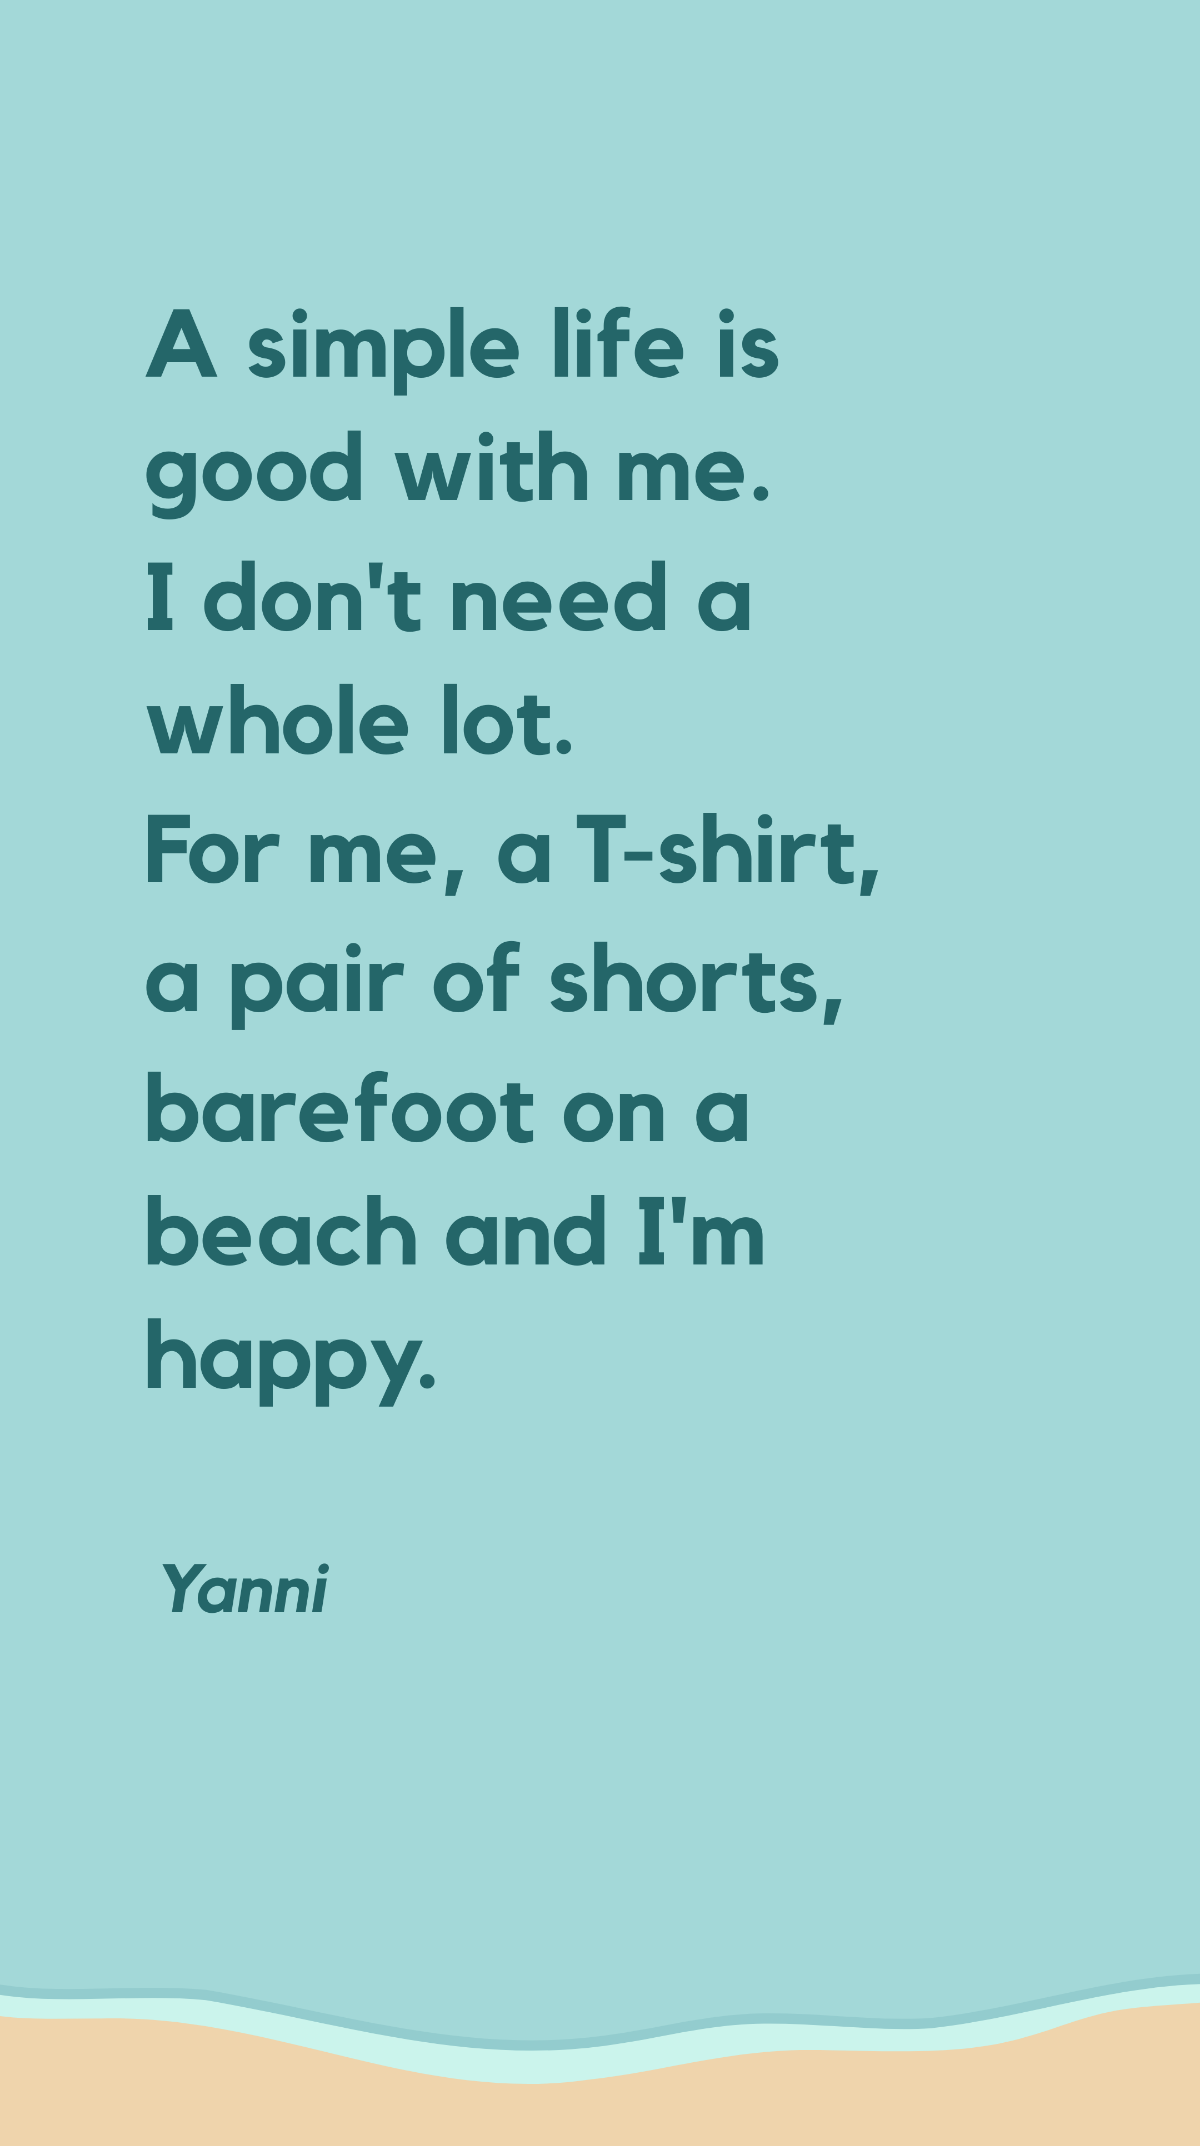 Yanni - A simple life is good with me. I don't need a whole lot. For me, a T-shirt, a pair of shorts, barefoot on a beach and I'm happy. Template